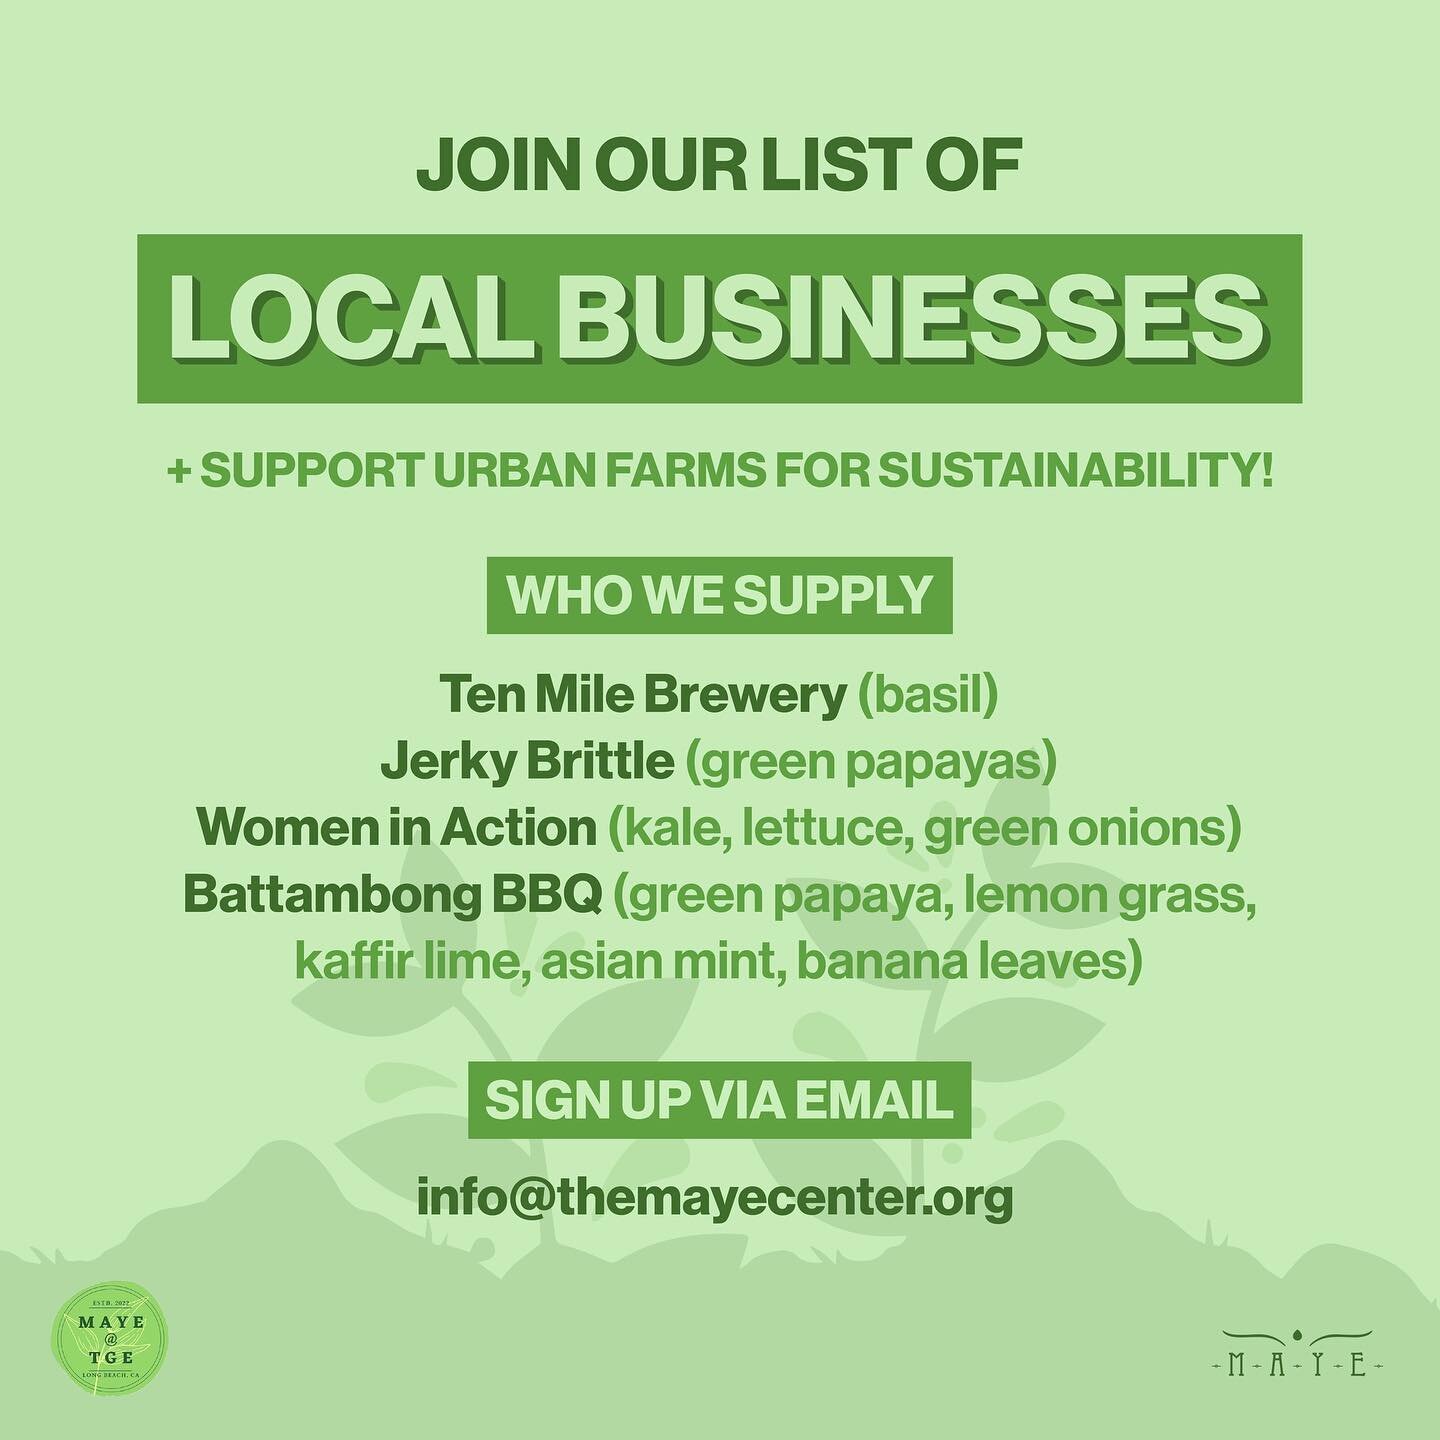 🍋 Join our list of Local Businesses and support urban farms for sustainability!
🥬 We are currently supplying produce to the following businesses: @tenmilebrewing (basil), @jerkybrittle (green papayas), @womeninactionro (kale, lettuce, green onions)